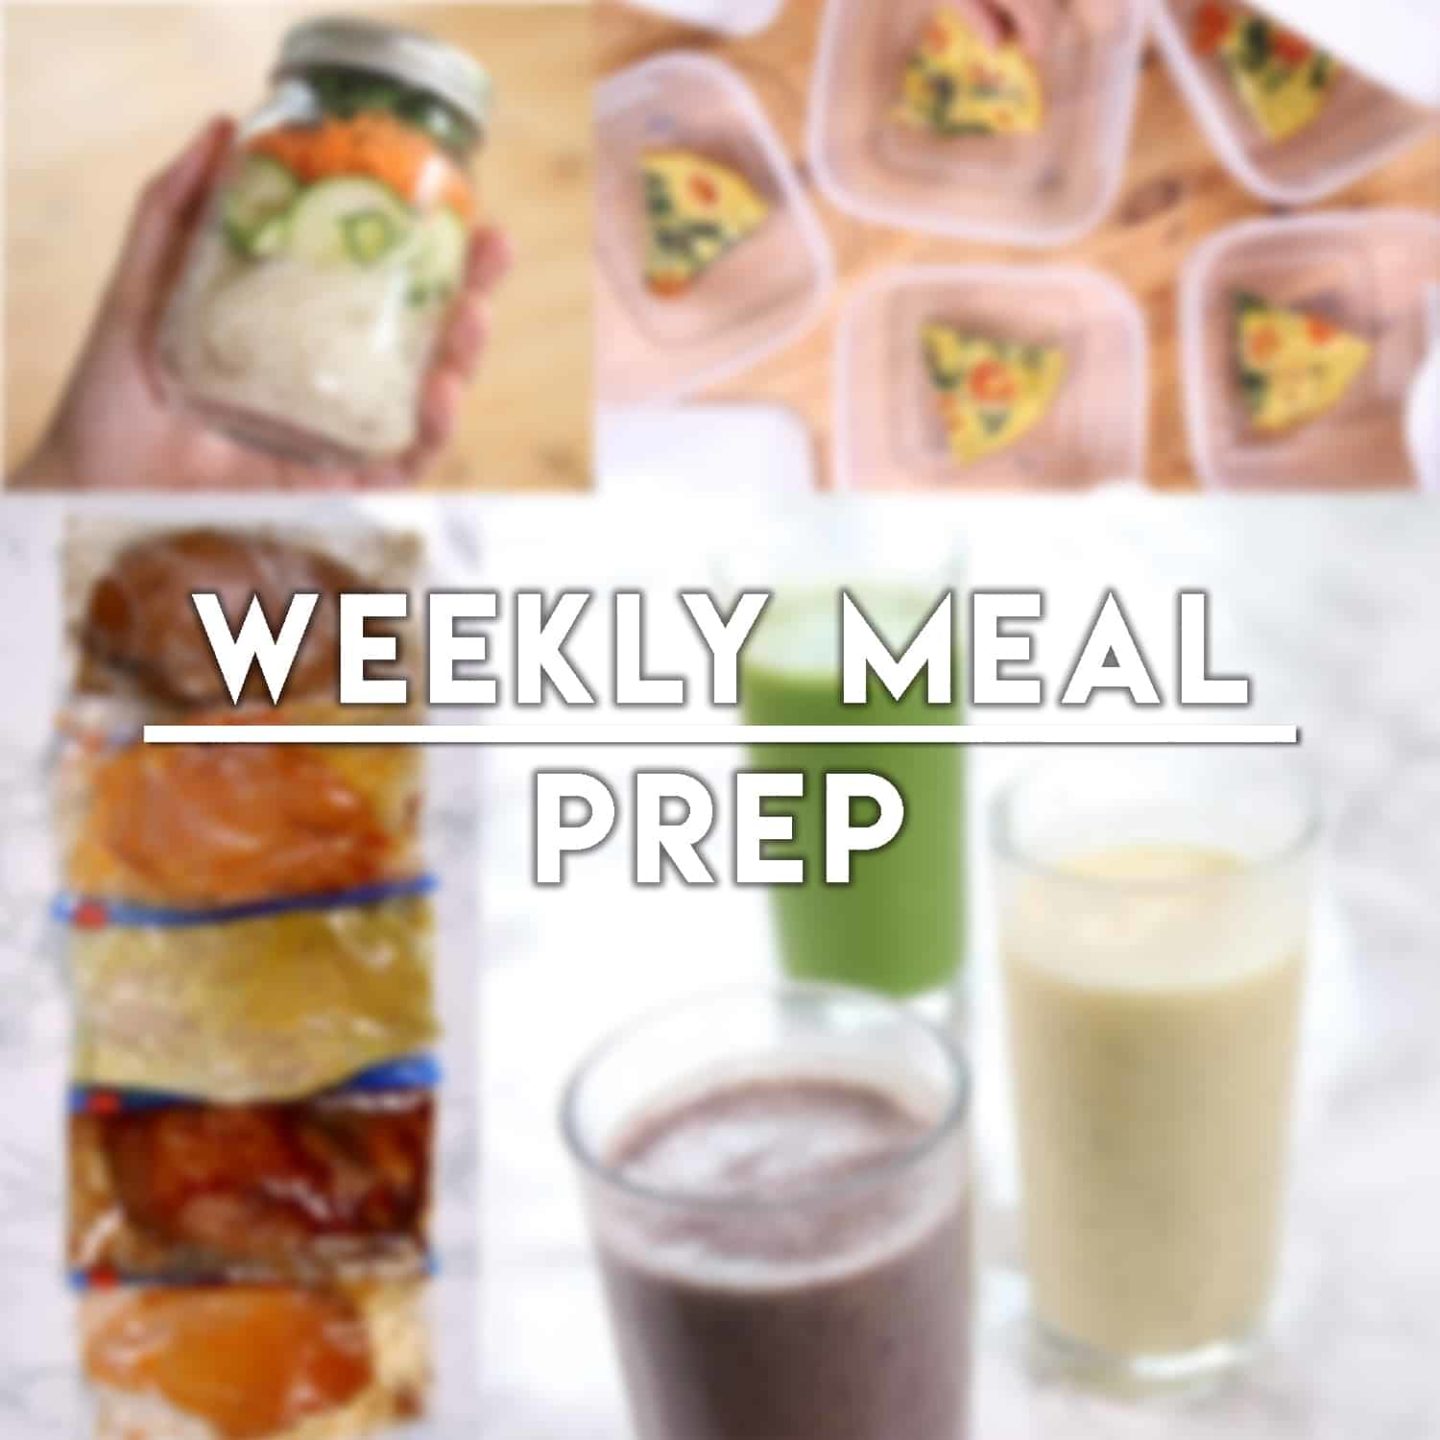 5 Low FODMAP Chicken Marinade Recipes For Weekly Meal Prep